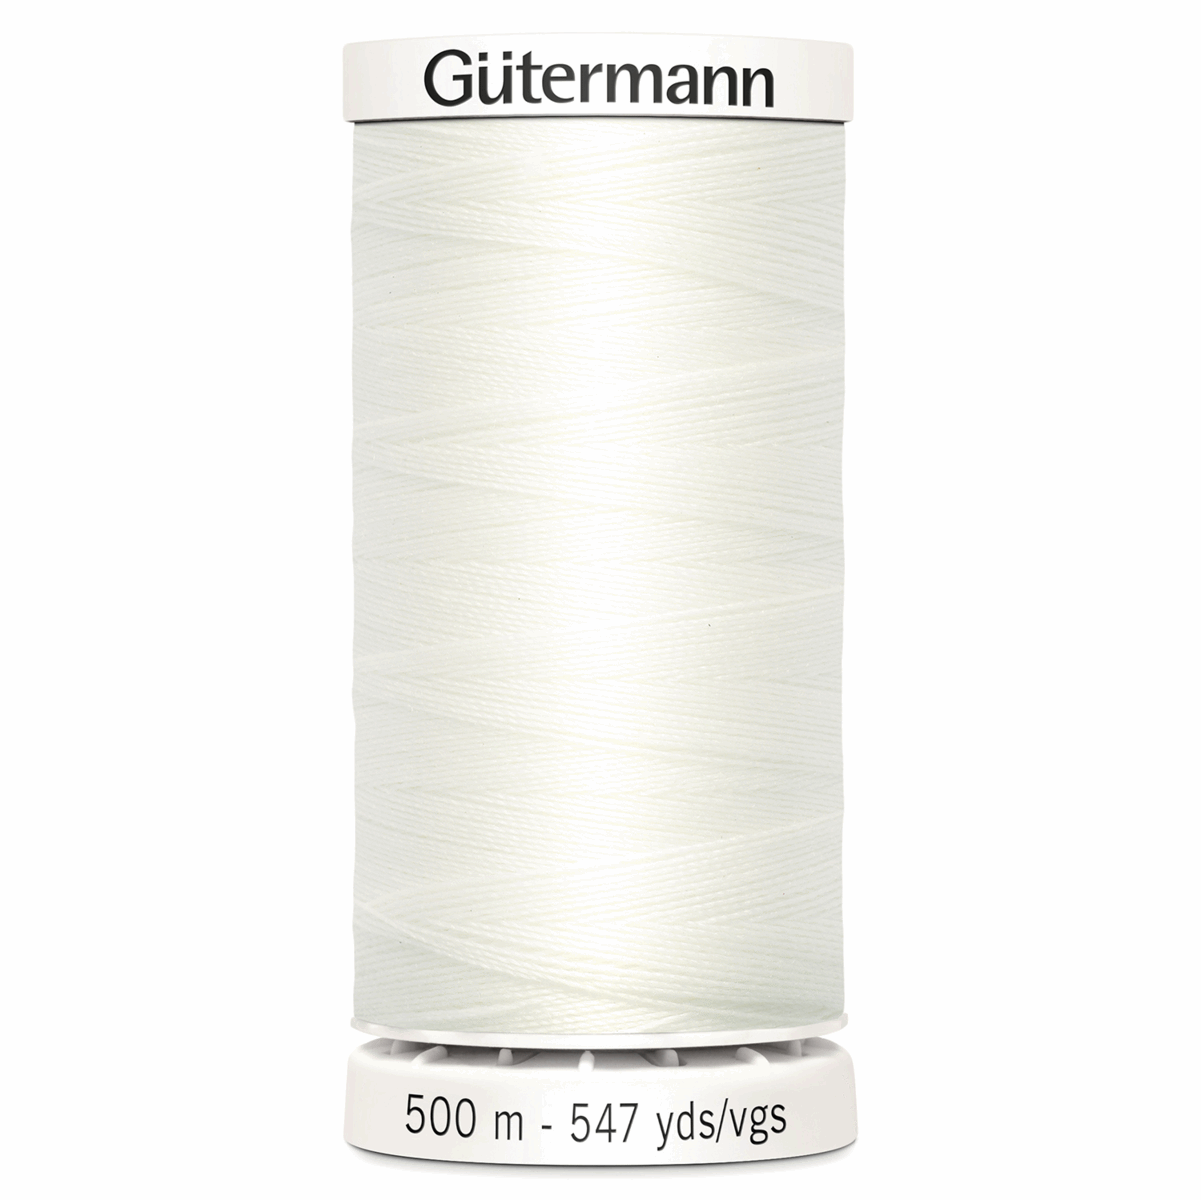 500m size of Gutermann Sew All Polyester Sewing Thread, 111 Off White from Jaycotts 